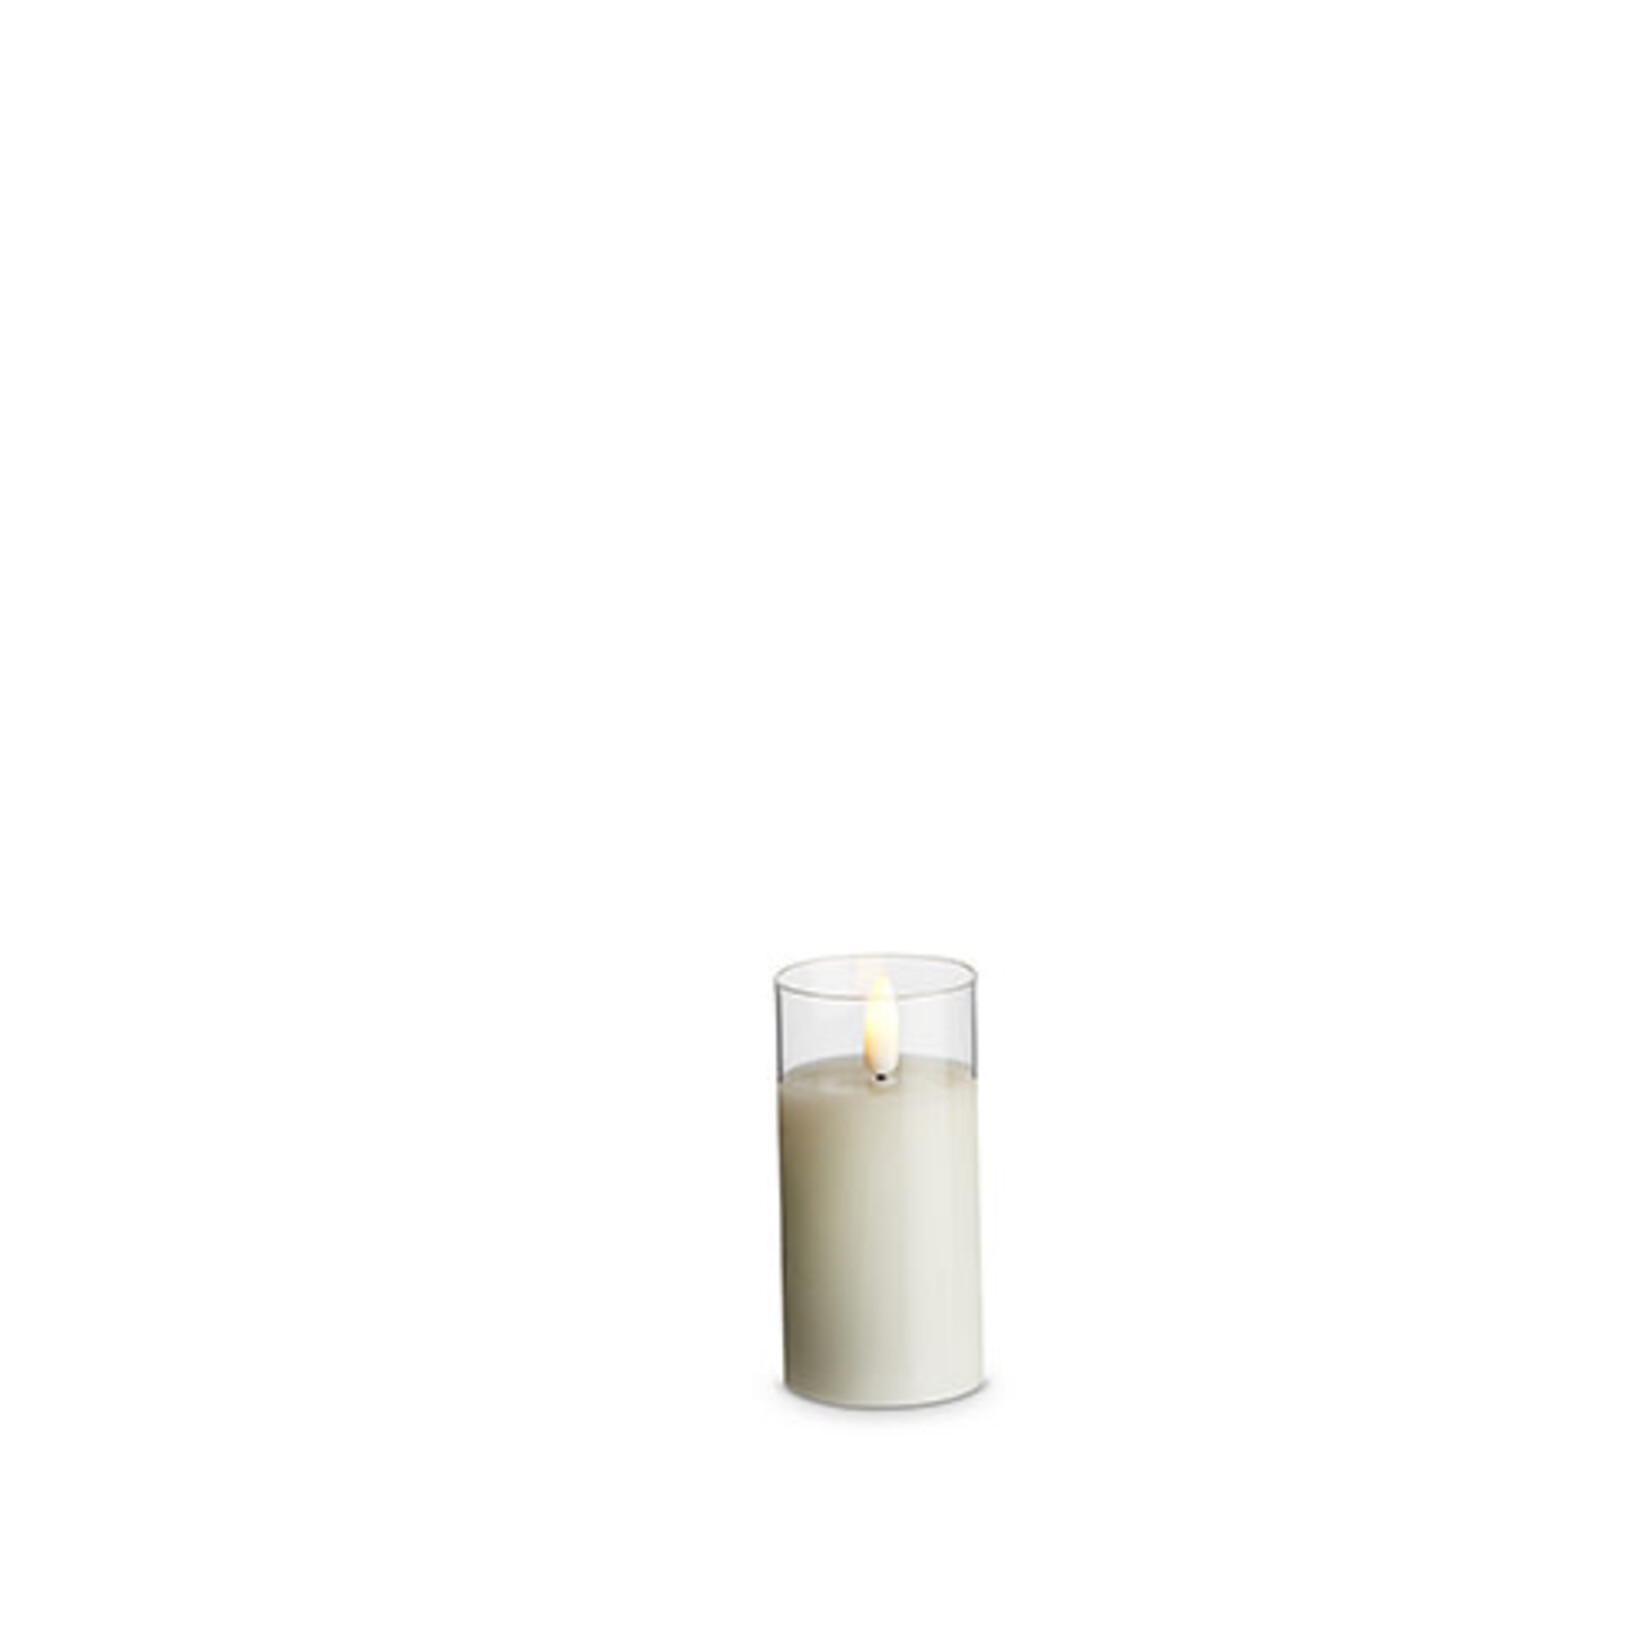 2X4 CLEAR GLASS IVORY PILLAR CANDLE